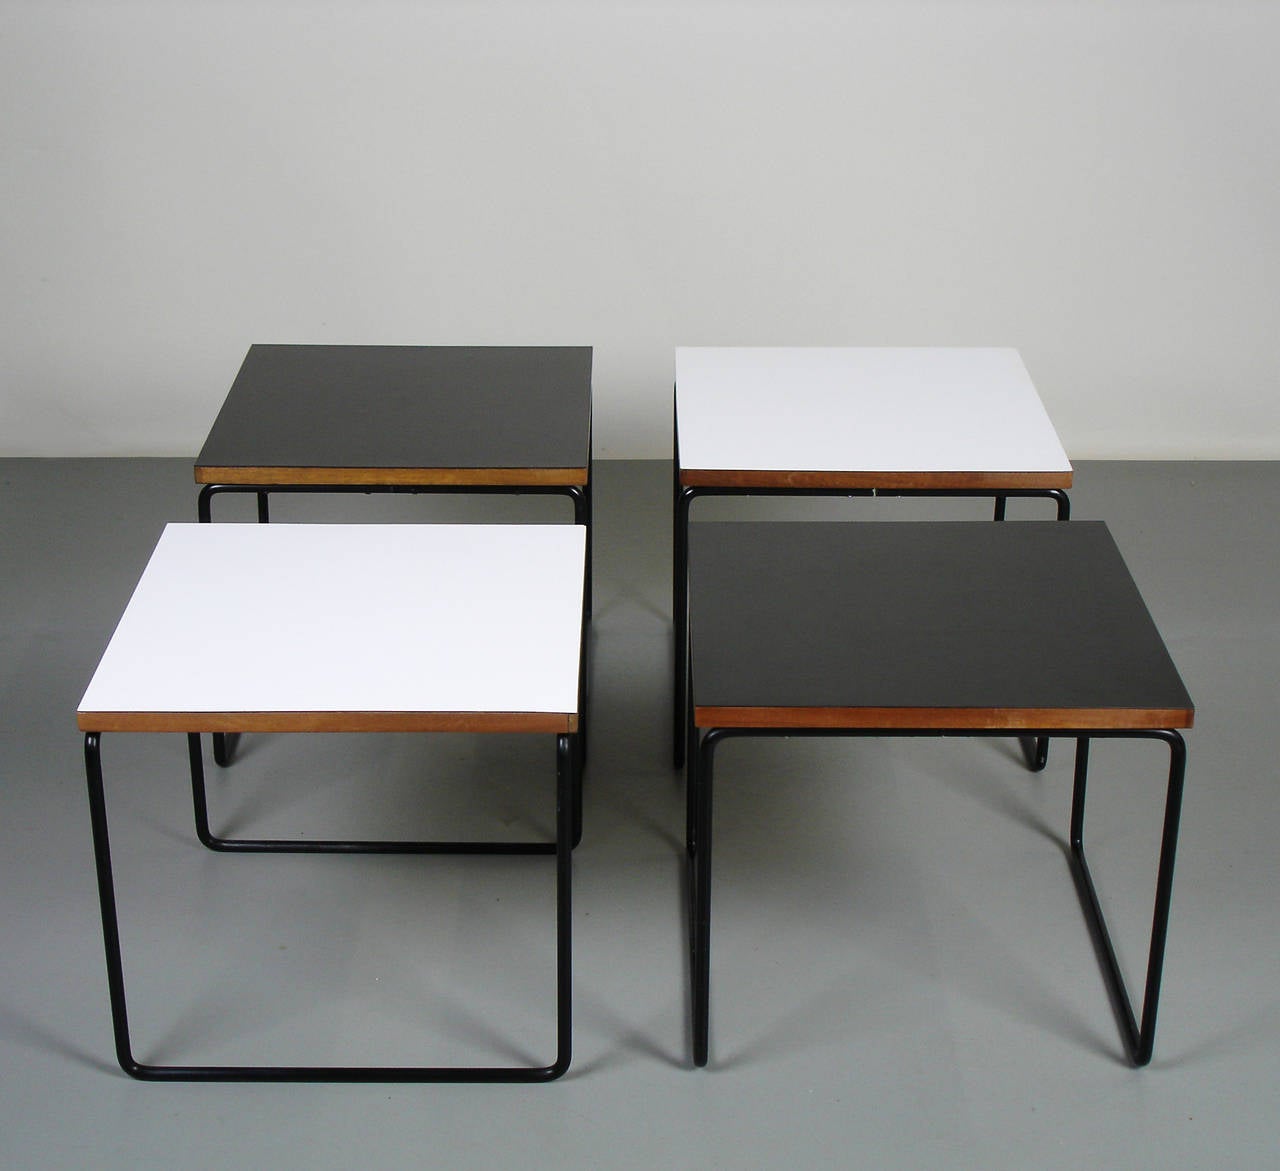 4 side tables or coffee tables  by Pierre Guariche with a base forming structure in black enamelled steel wire,tops in wood plated black or white formica.Marked Steiner